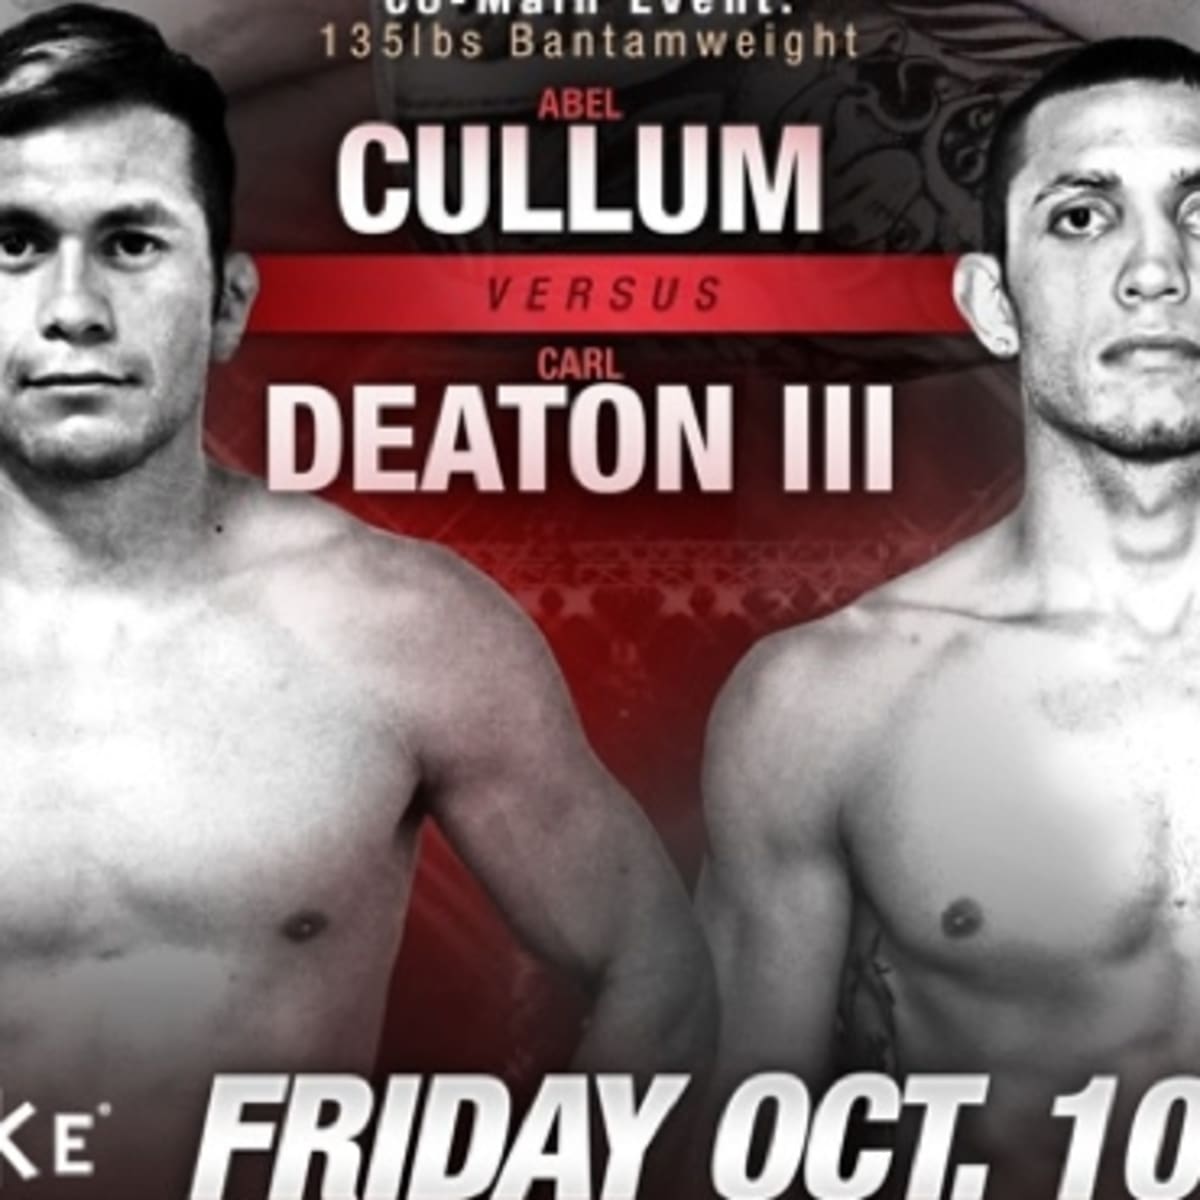 RFA 19 Gets New Co-Main Event as Abel Cullum Steps in for Injured Jeff Curran